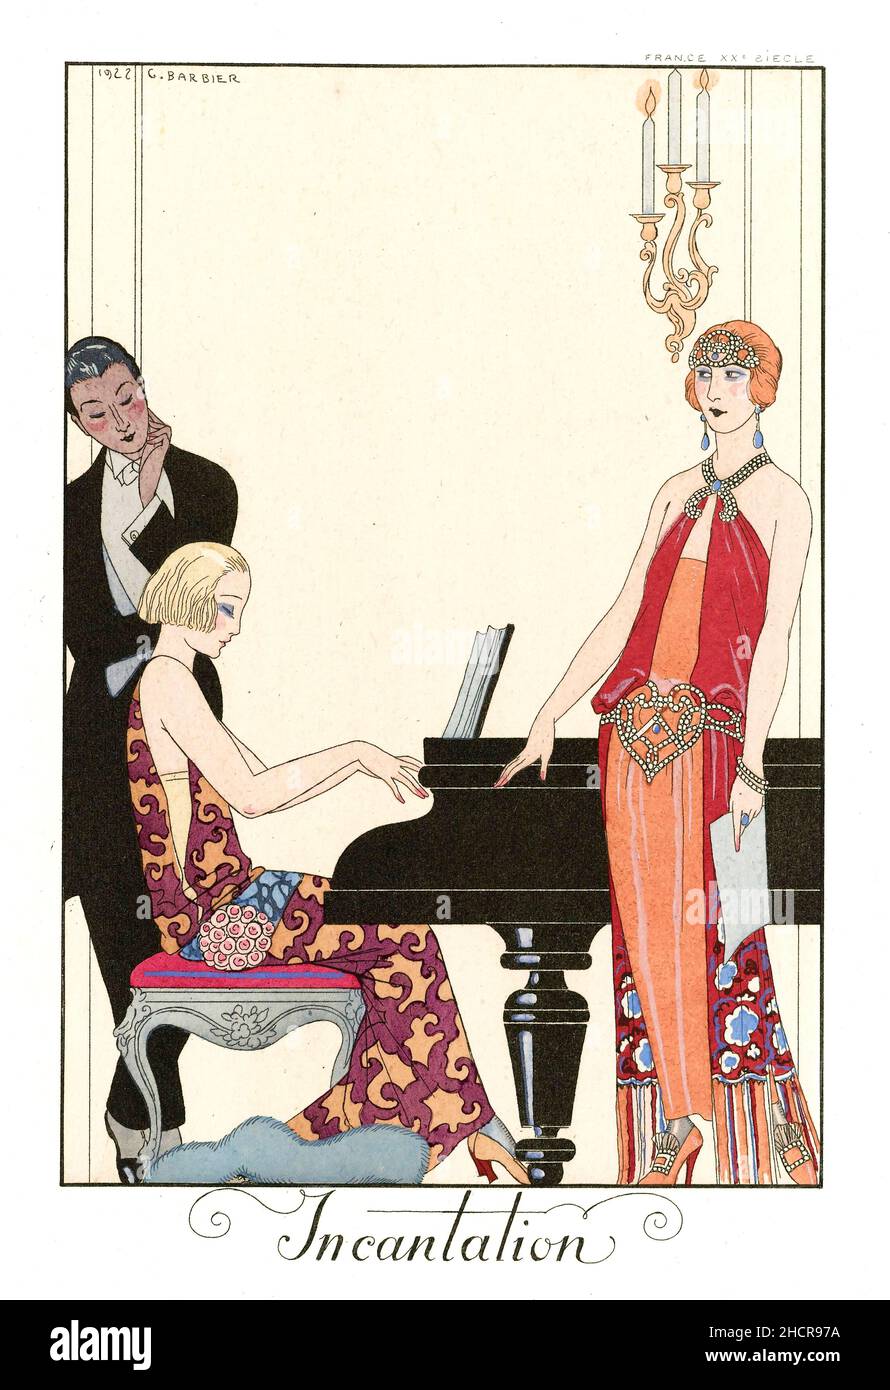 Incantation, a vintage illustration by the French artist, George Barbier (1882–1932), 1923 Stock Photo